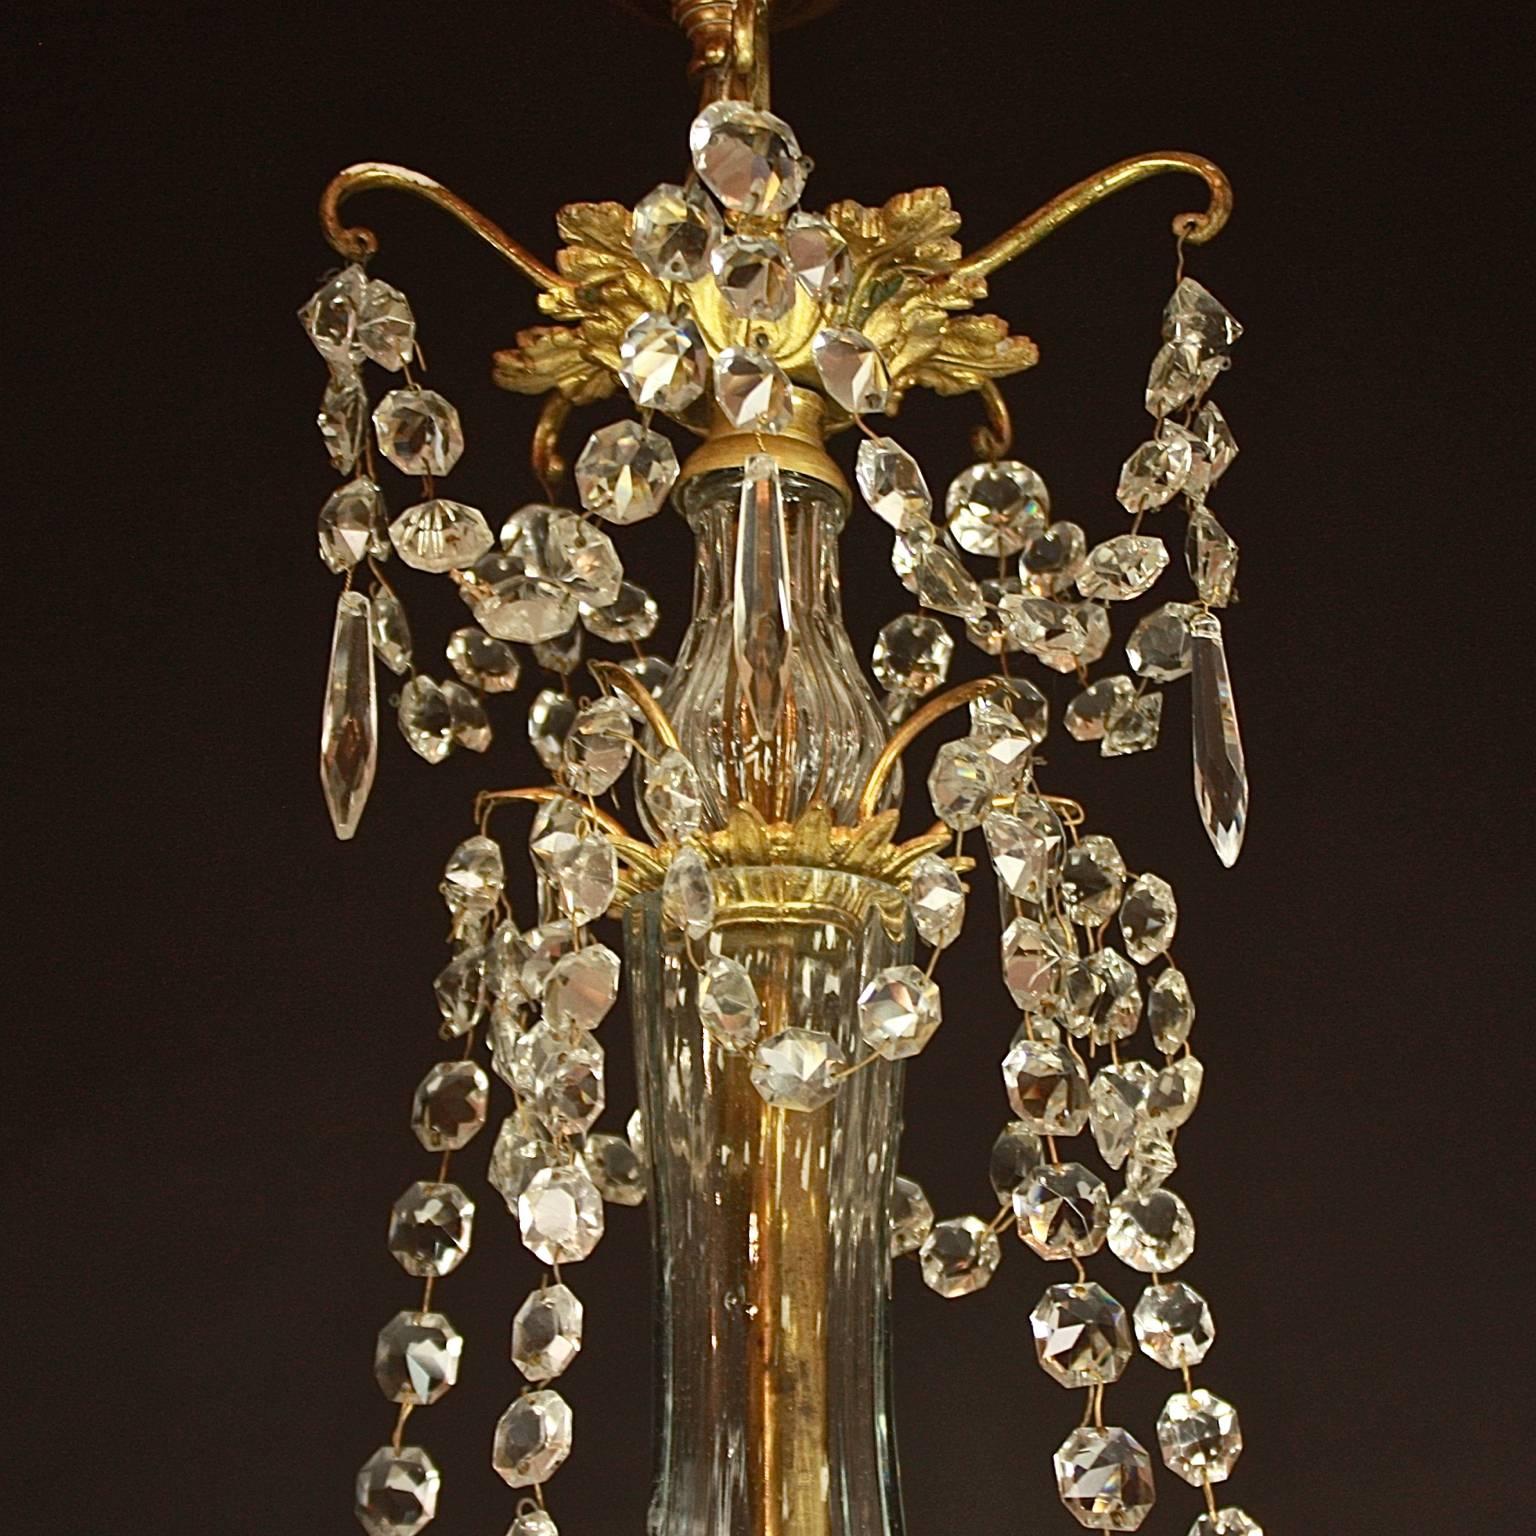 French 19th Century Louis XV Style Gilt-Bronze and Cut-Crystal Five-Light Chandelier